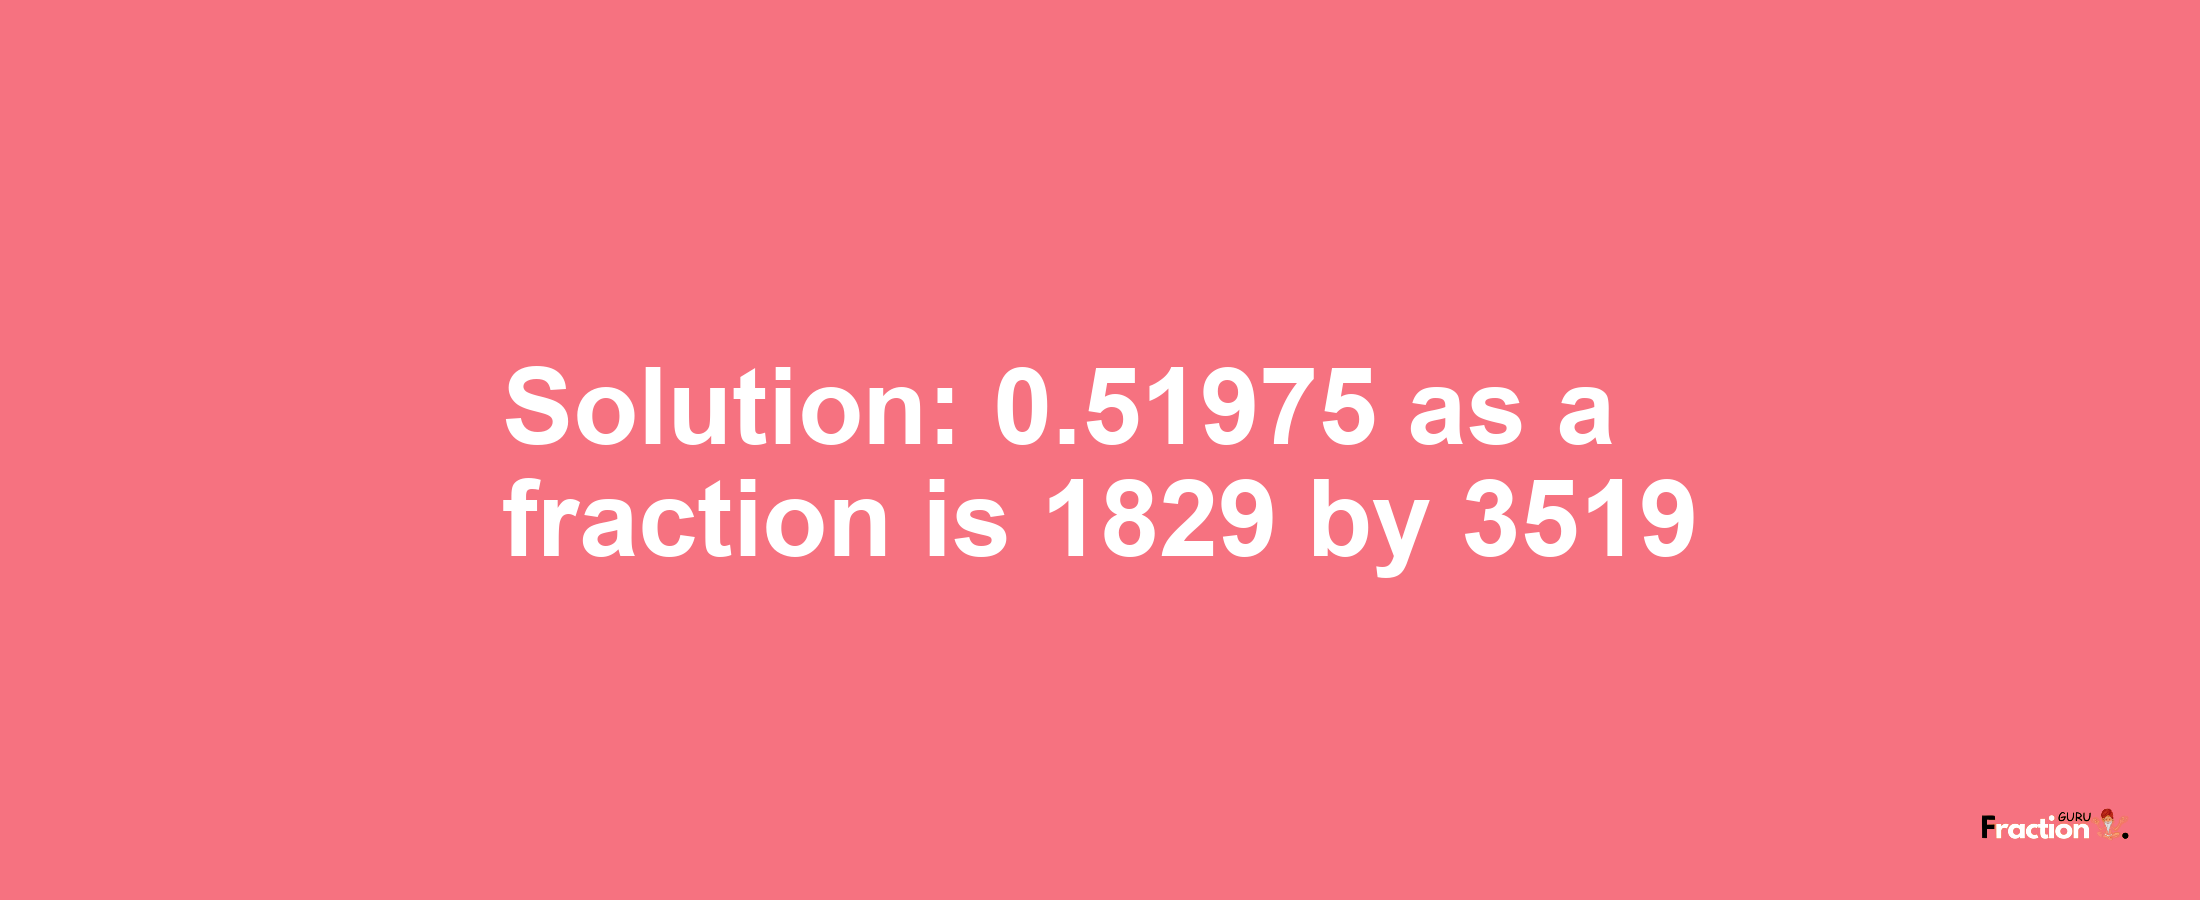 Solution:0.51975 as a fraction is 1829/3519